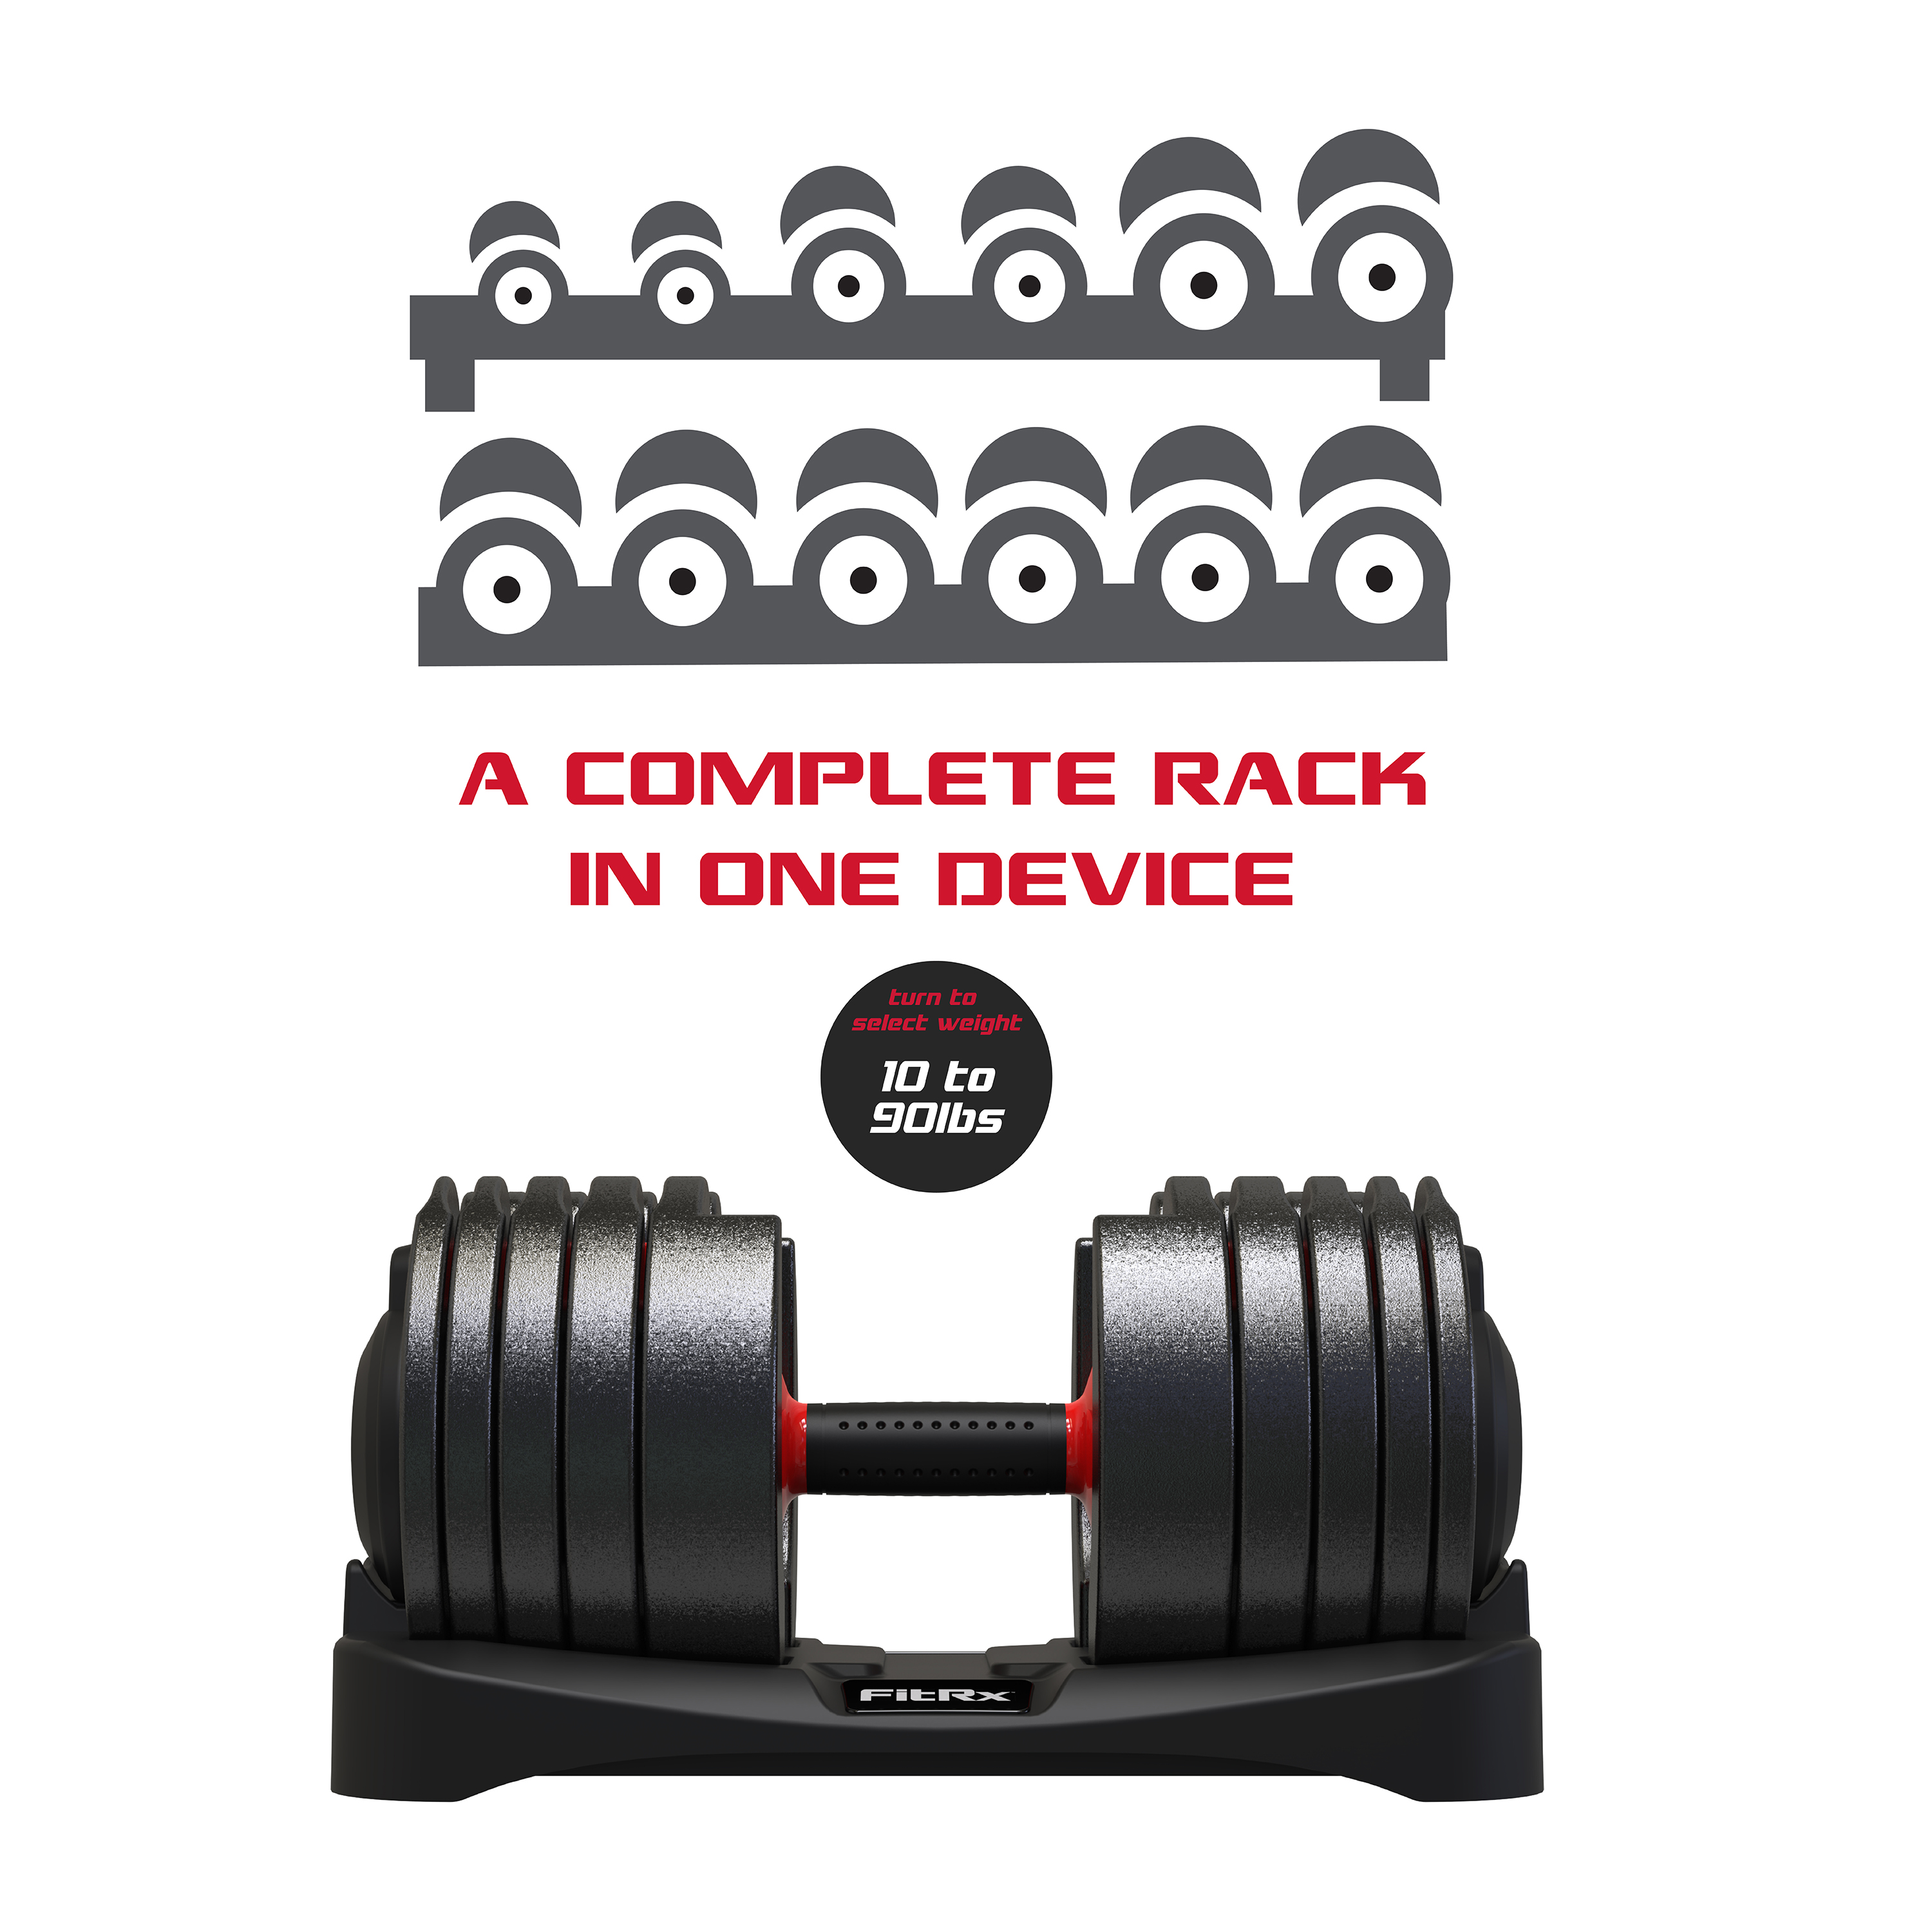 FitRx SmartBell XL, Quick-Select Adjustable Dumbbell, 10-90 lbs. Weight, Black, Single - image 4 of 10